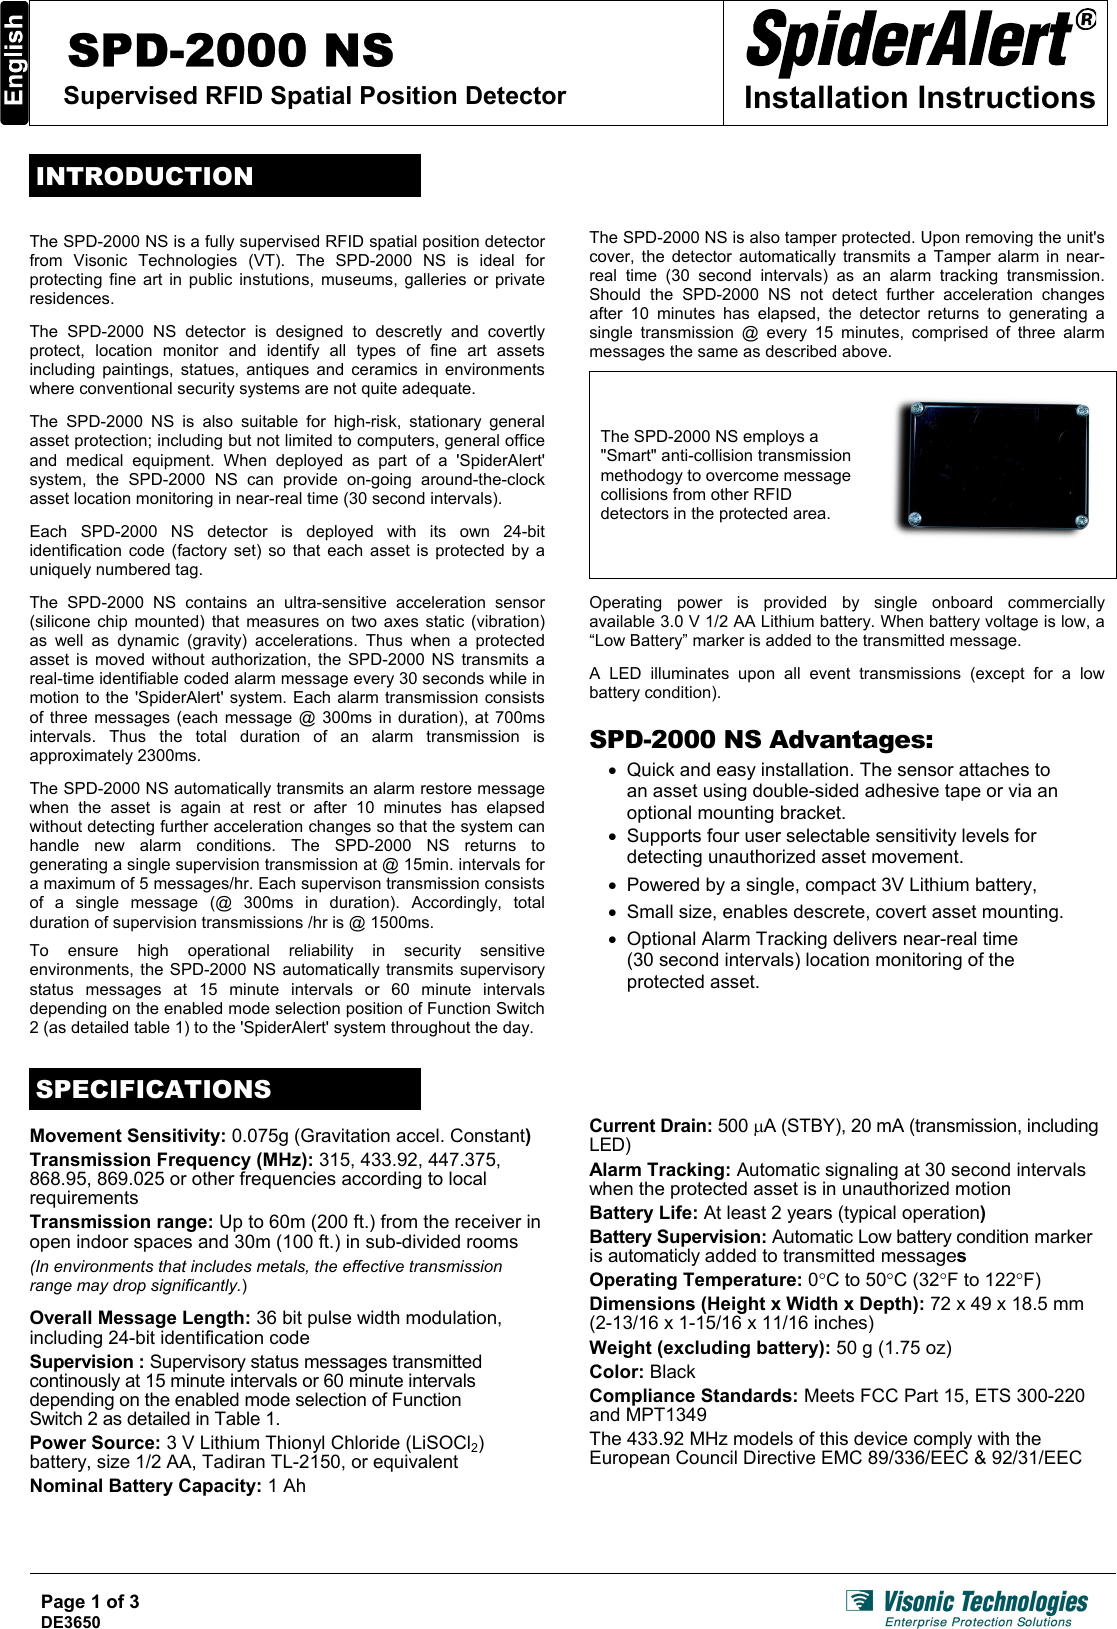 SPD-2000 NS Supervised RFID Spatial Position Detector  Installation Instructions  INTRODUCTION  The SPD-2000 NS is a fully supervised RFID spatial position detector from Visonic Technologies (VT). The SPD-2000 NS is ideal for protecting fine art in public instutions, museums, galleries or private residences.  The SPD-2000 NS detector is designed to descretly and covertly protect, location monitor and identify all types of fine art assets including paintings, statues, antiques and ceramics in environments where conventional security systems are not quite adequate. Page 1 of 3 DE3650   The SPD-2000 NS is also suitable for high-risk, stationary general asset protection; including but not limited to computers, general office and medical equipment. When deployed as part of a &apos;SpiderAlert&apos; system, the SPD-2000 NS can provide on-going around-the-clock asset location monitoring in near-real time (30 second intervals).  Each SPD-2000 NS detector is deployed with its own 24-bit identification code (factory set) so that each asset is protected by a uniquely numbered tag.  The SPD-2000 NS contains an ultra-sensitive acceleration sensor (silicone chip mounted) that measures on two axes static (vibration) as well as dynamic (gravity) accelerations. Thus when a protected asset is moved without authorization, the SPD-2000 NS transmits a real-time identifiable coded alarm message every 30 seconds while in motion to the &apos;SpiderAlert&apos; system. Each alarm transmission consists of three messages (each message @ 300ms in duration), at 700ms intervals. Thus the total duration of an alarm transmission is approximately 2300ms.  The SPD-2000 NS automatically transmits an alarm restore message when the asset is again at rest or after 10 minutes has elapsed without detecting further acceleration changes so that the system can handle new alarm conditions. The SPD-2000 NS returns to generating a single supervision transmission at @ 15min. intervals for a maximum of 5 messages/hr. Each supervison transmission consists of a single message (@ 300ms in duration). Accordingly, total duration of supervision transmissions /hr is @ 1500ms.  To ensure high operational reliability in security sensitive environments, the SPD-2000 NS automatically transmits supervisory status messages at 15 minute intervals or 60 minute intervals depending on the enabled mode selection position of Function Switch 2 (as detailed table 1) to the &apos;SpiderAlert&apos; system throughout the day.  The SPD-2000 NS is also tamper protected. Upon removing the unit&apos;s cover, the detector automatically transmits a Tamper alarm in near-real time (30 second intervals) as an alarm tracking transmission. Should the SPD-2000 NS not detect further acceleration changes after 10 minutes has elapsed, the detector returns to generating a single transmission @ every 15 minutes, comprised of three alarm messages the same as described above.  The SPD-2000 NS employs a &quot;Smart&quot; anti-collision transmission methodogy to overcome message collisions from other RFID detectors in the protected area.   Operating power is provided by single onboard commercially available 3.0 V 1/2 AA Lithium battery. When battery voltage is low, a “Low Battery” marker is added to the transmitted message.  A LED illuminates upon all event transmissions (except for a low battery condition).  SPD-2000 NS Advantages: •  Quick and easy installation. The sensor attaches to  an asset using double-sided adhesive tape or via an optional mounting bracket. •  Supports four user selectable sensitivity levels for detecting unauthorized asset movement. •  Powered by a single, compact 3V Lithium battery, •  Small size, enables descrete, covert asset mounting. •  Optional Alarm Tracking delivers near-real time  (30 second intervals) location monitoring of the  protected asset.   SPECIFICATIONS  Movement Sensitivity: 0.075g (Gravitation accel. Constant) Transmission Frequency (MHz): 315, 433.92, 447.375, 868.95, 869.025 or other frequencies according to local requirements Transmission range: Up to 60m (200 ft.) from the receiver in open indoor spaces and 30m (100 ft.) in sub-divided rooms (In environments that includes metals, the effective transmission range may drop significantly.)  Overall Message Length: 36 bit pulse width modulation, including 24-bit identification code Supervision : Supervisory status messages transmitted continously at 15 minute intervals or 60 minute intervals depending on the enabled mode selection of Function  Switch 2 as detailed in Table 1. Power Source: 3 V Lithium Thionyl Chloride (LiSOCl2) battery, size 1/2 AA, Tadiran TL-2150, or equivalent Nominal Battery Capacity: 1 Ah Current Drain: 500 µA (STBY), 20 mA (transmission, including LED) Alarm Tracking: Automatic signaling at 30 second intervals when the protected asset is in unauthorized motion Battery Life: At least 2 years (typical operation) Battery Supervision: Automatic Low battery condition marker is automaticly added to transmitted messages Operating Temperature: 0°C to 50°C (32°F to 122°F) Dimensions (Height x Width x Depth): 72 x 49 x 18.5 mm (2-13/16 x 1-15/16 x 11/16 inches) Weight (excluding battery): 50 g (1.75 oz) Color: Black Compliance Standards: Meets FCC Part 15, ETS 300-220 and MPT1349 The 433.92 MHz models of this device comply with the European Council Directive EMC 89/336/EEC &amp; 92/31/EEC     